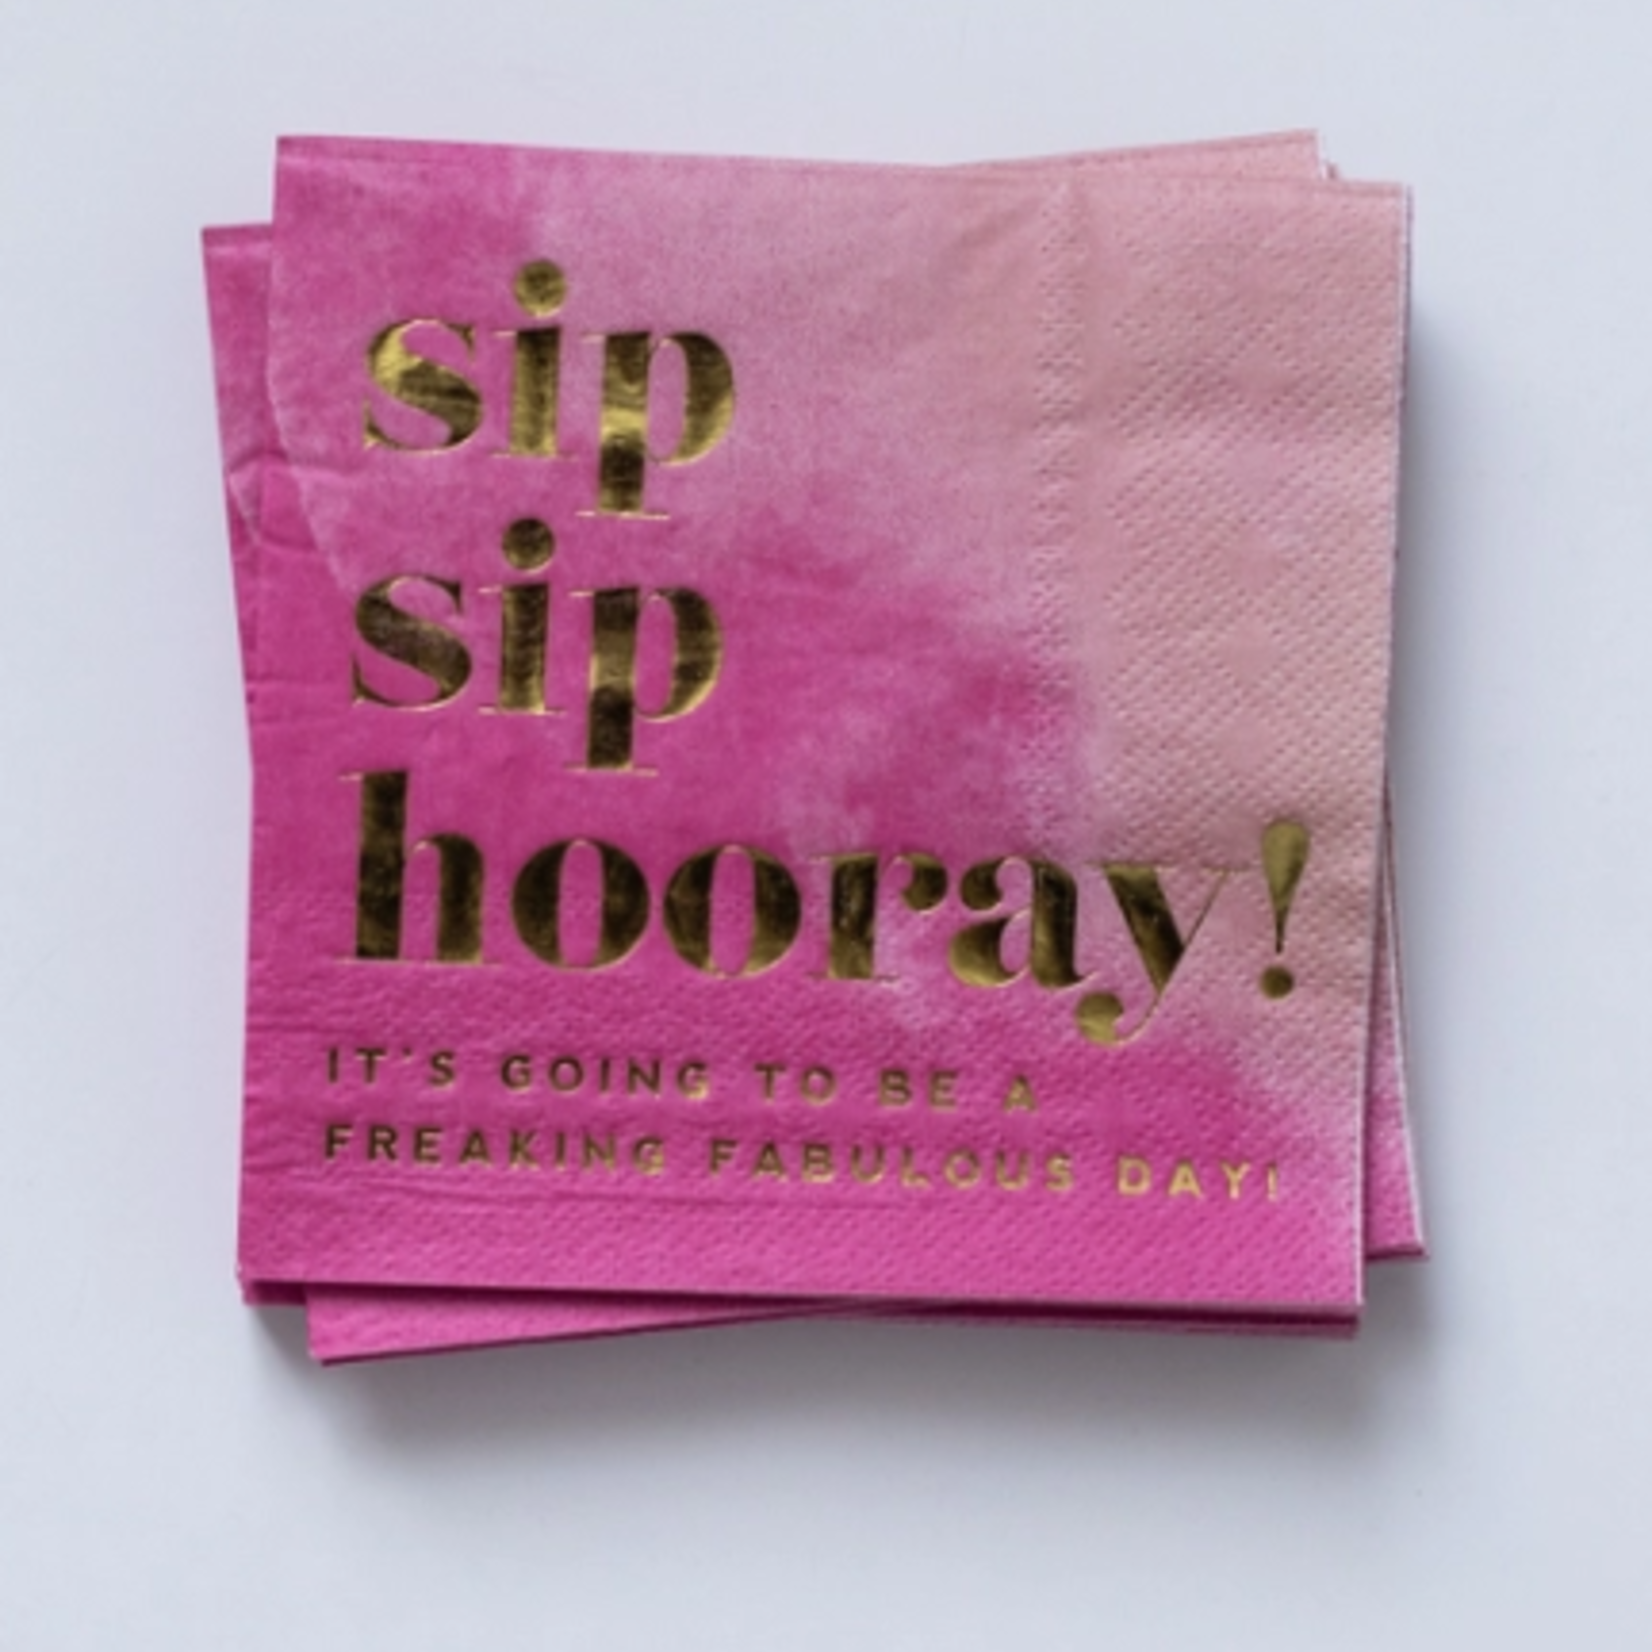 Kitty Meow Boutique Sip Sip Hooray Cocktail Napkins